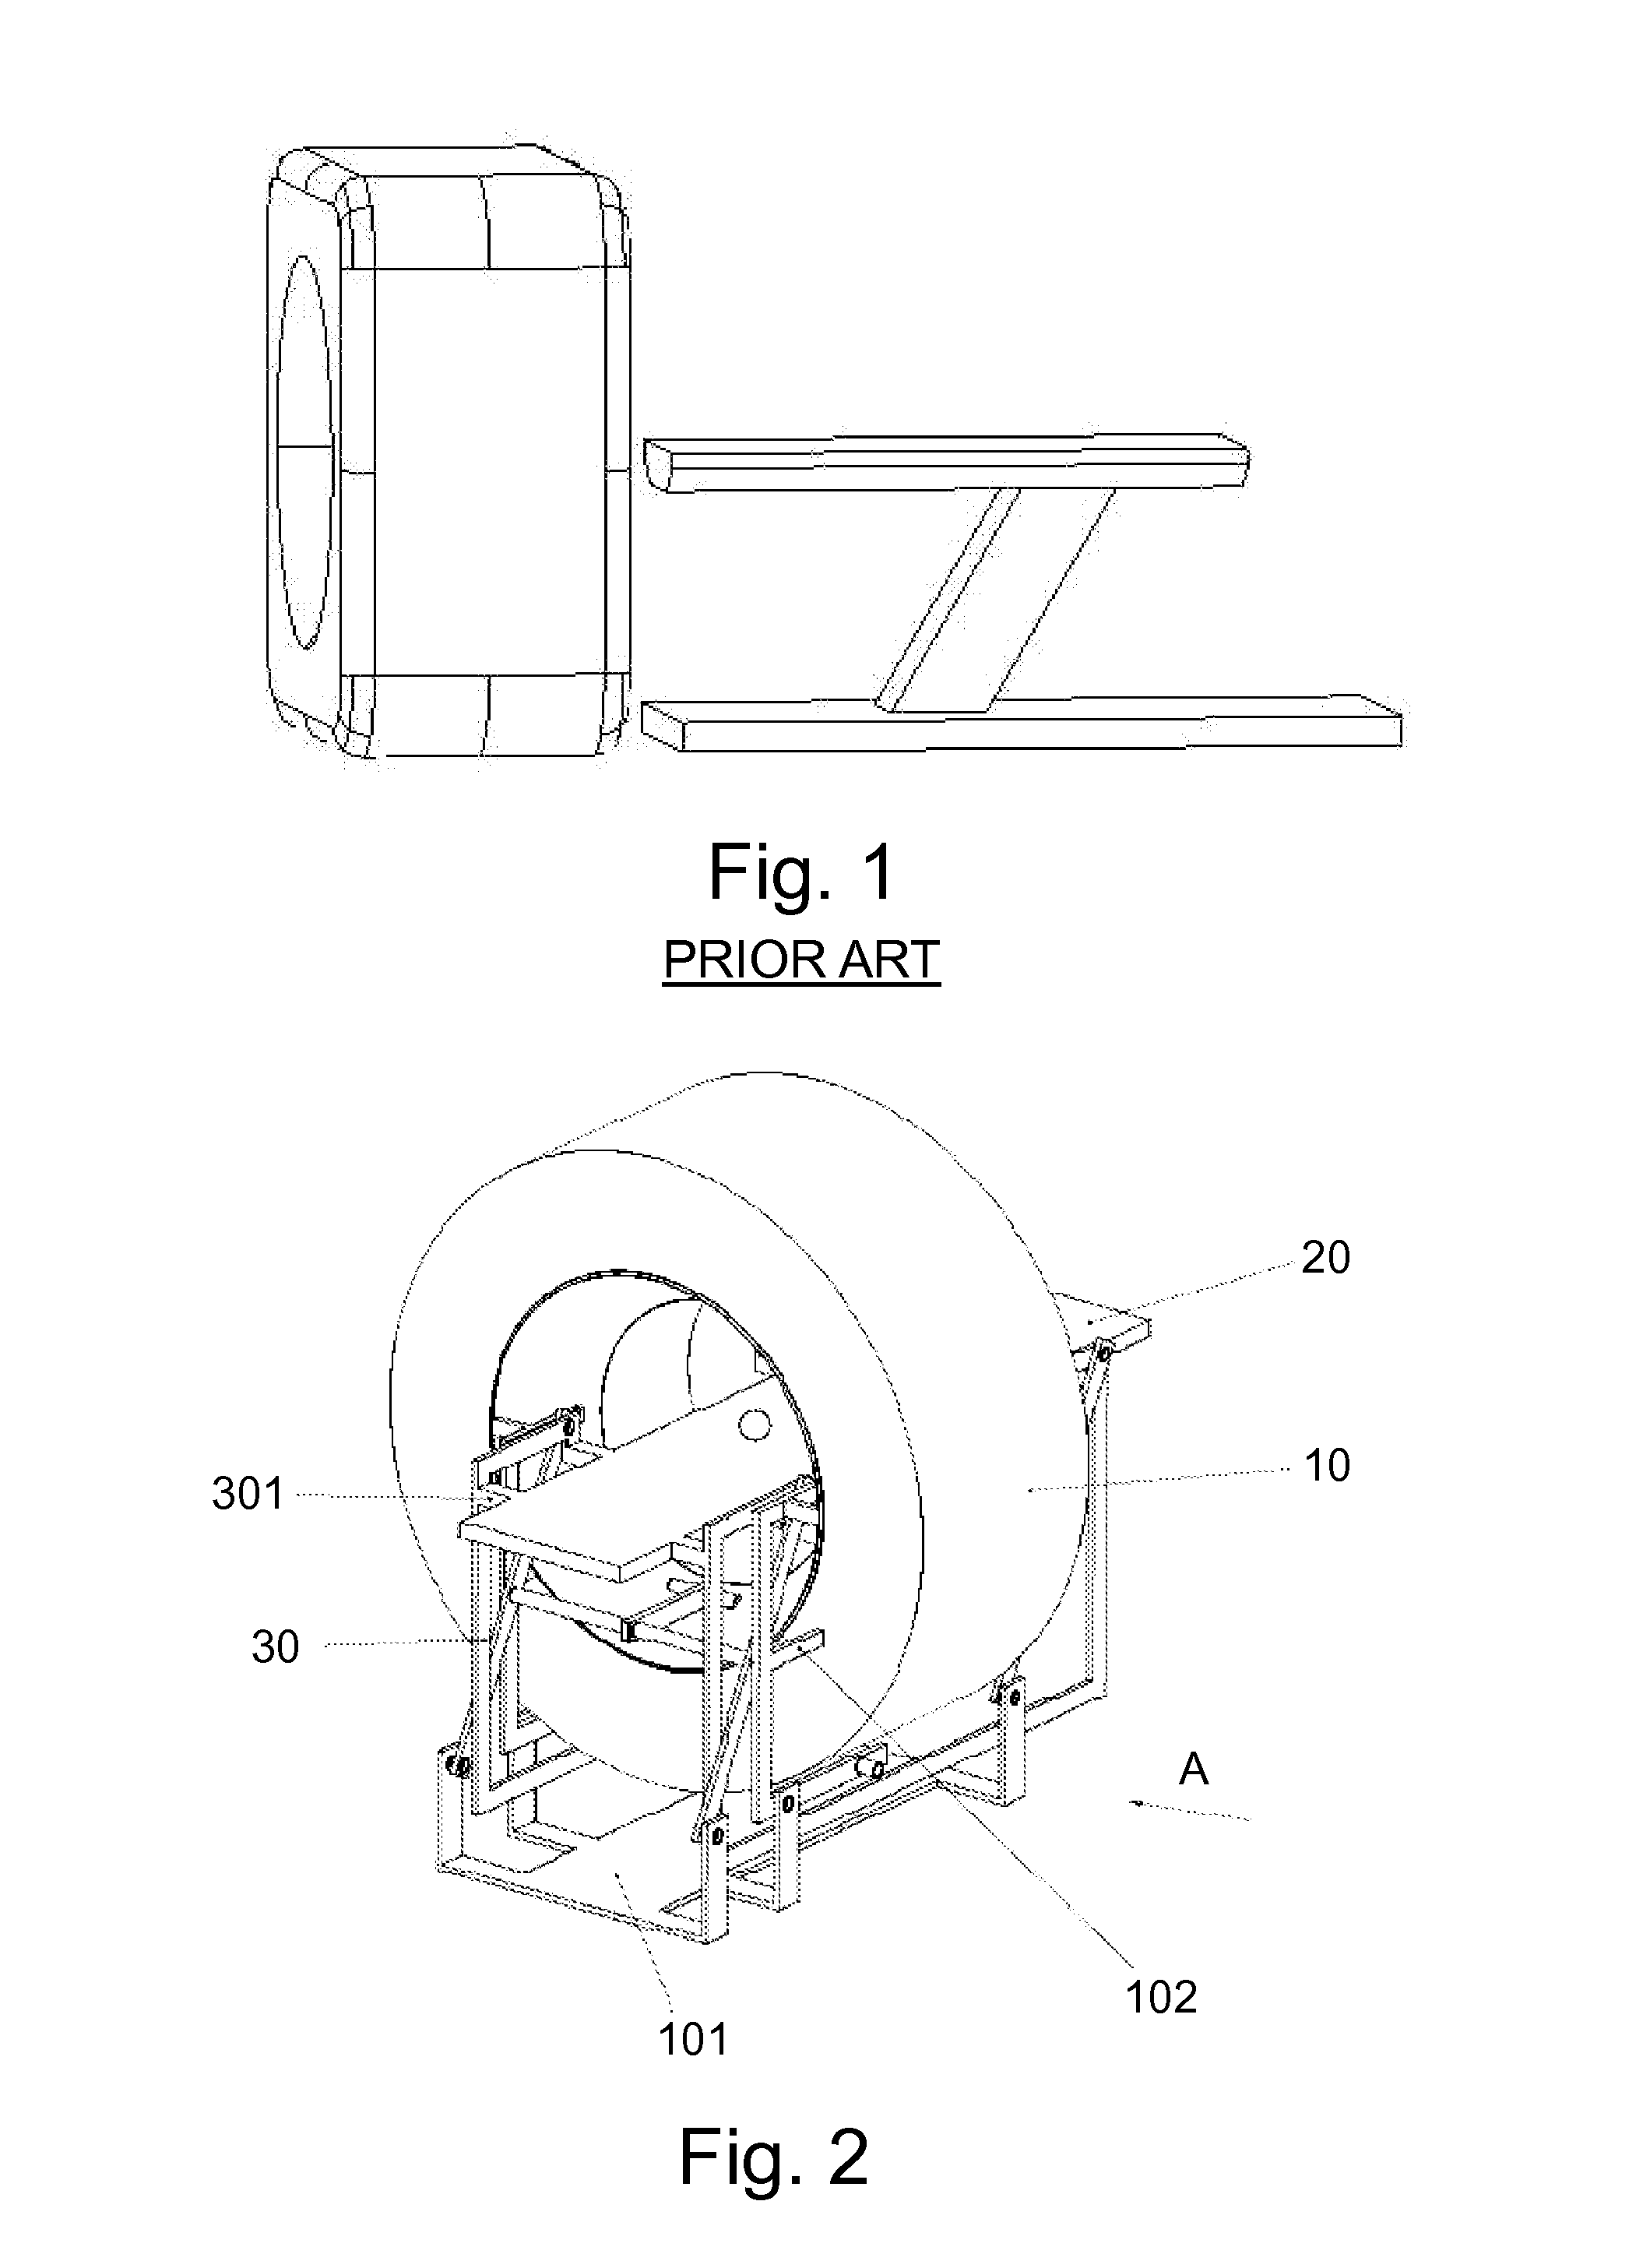 Ct scanning device